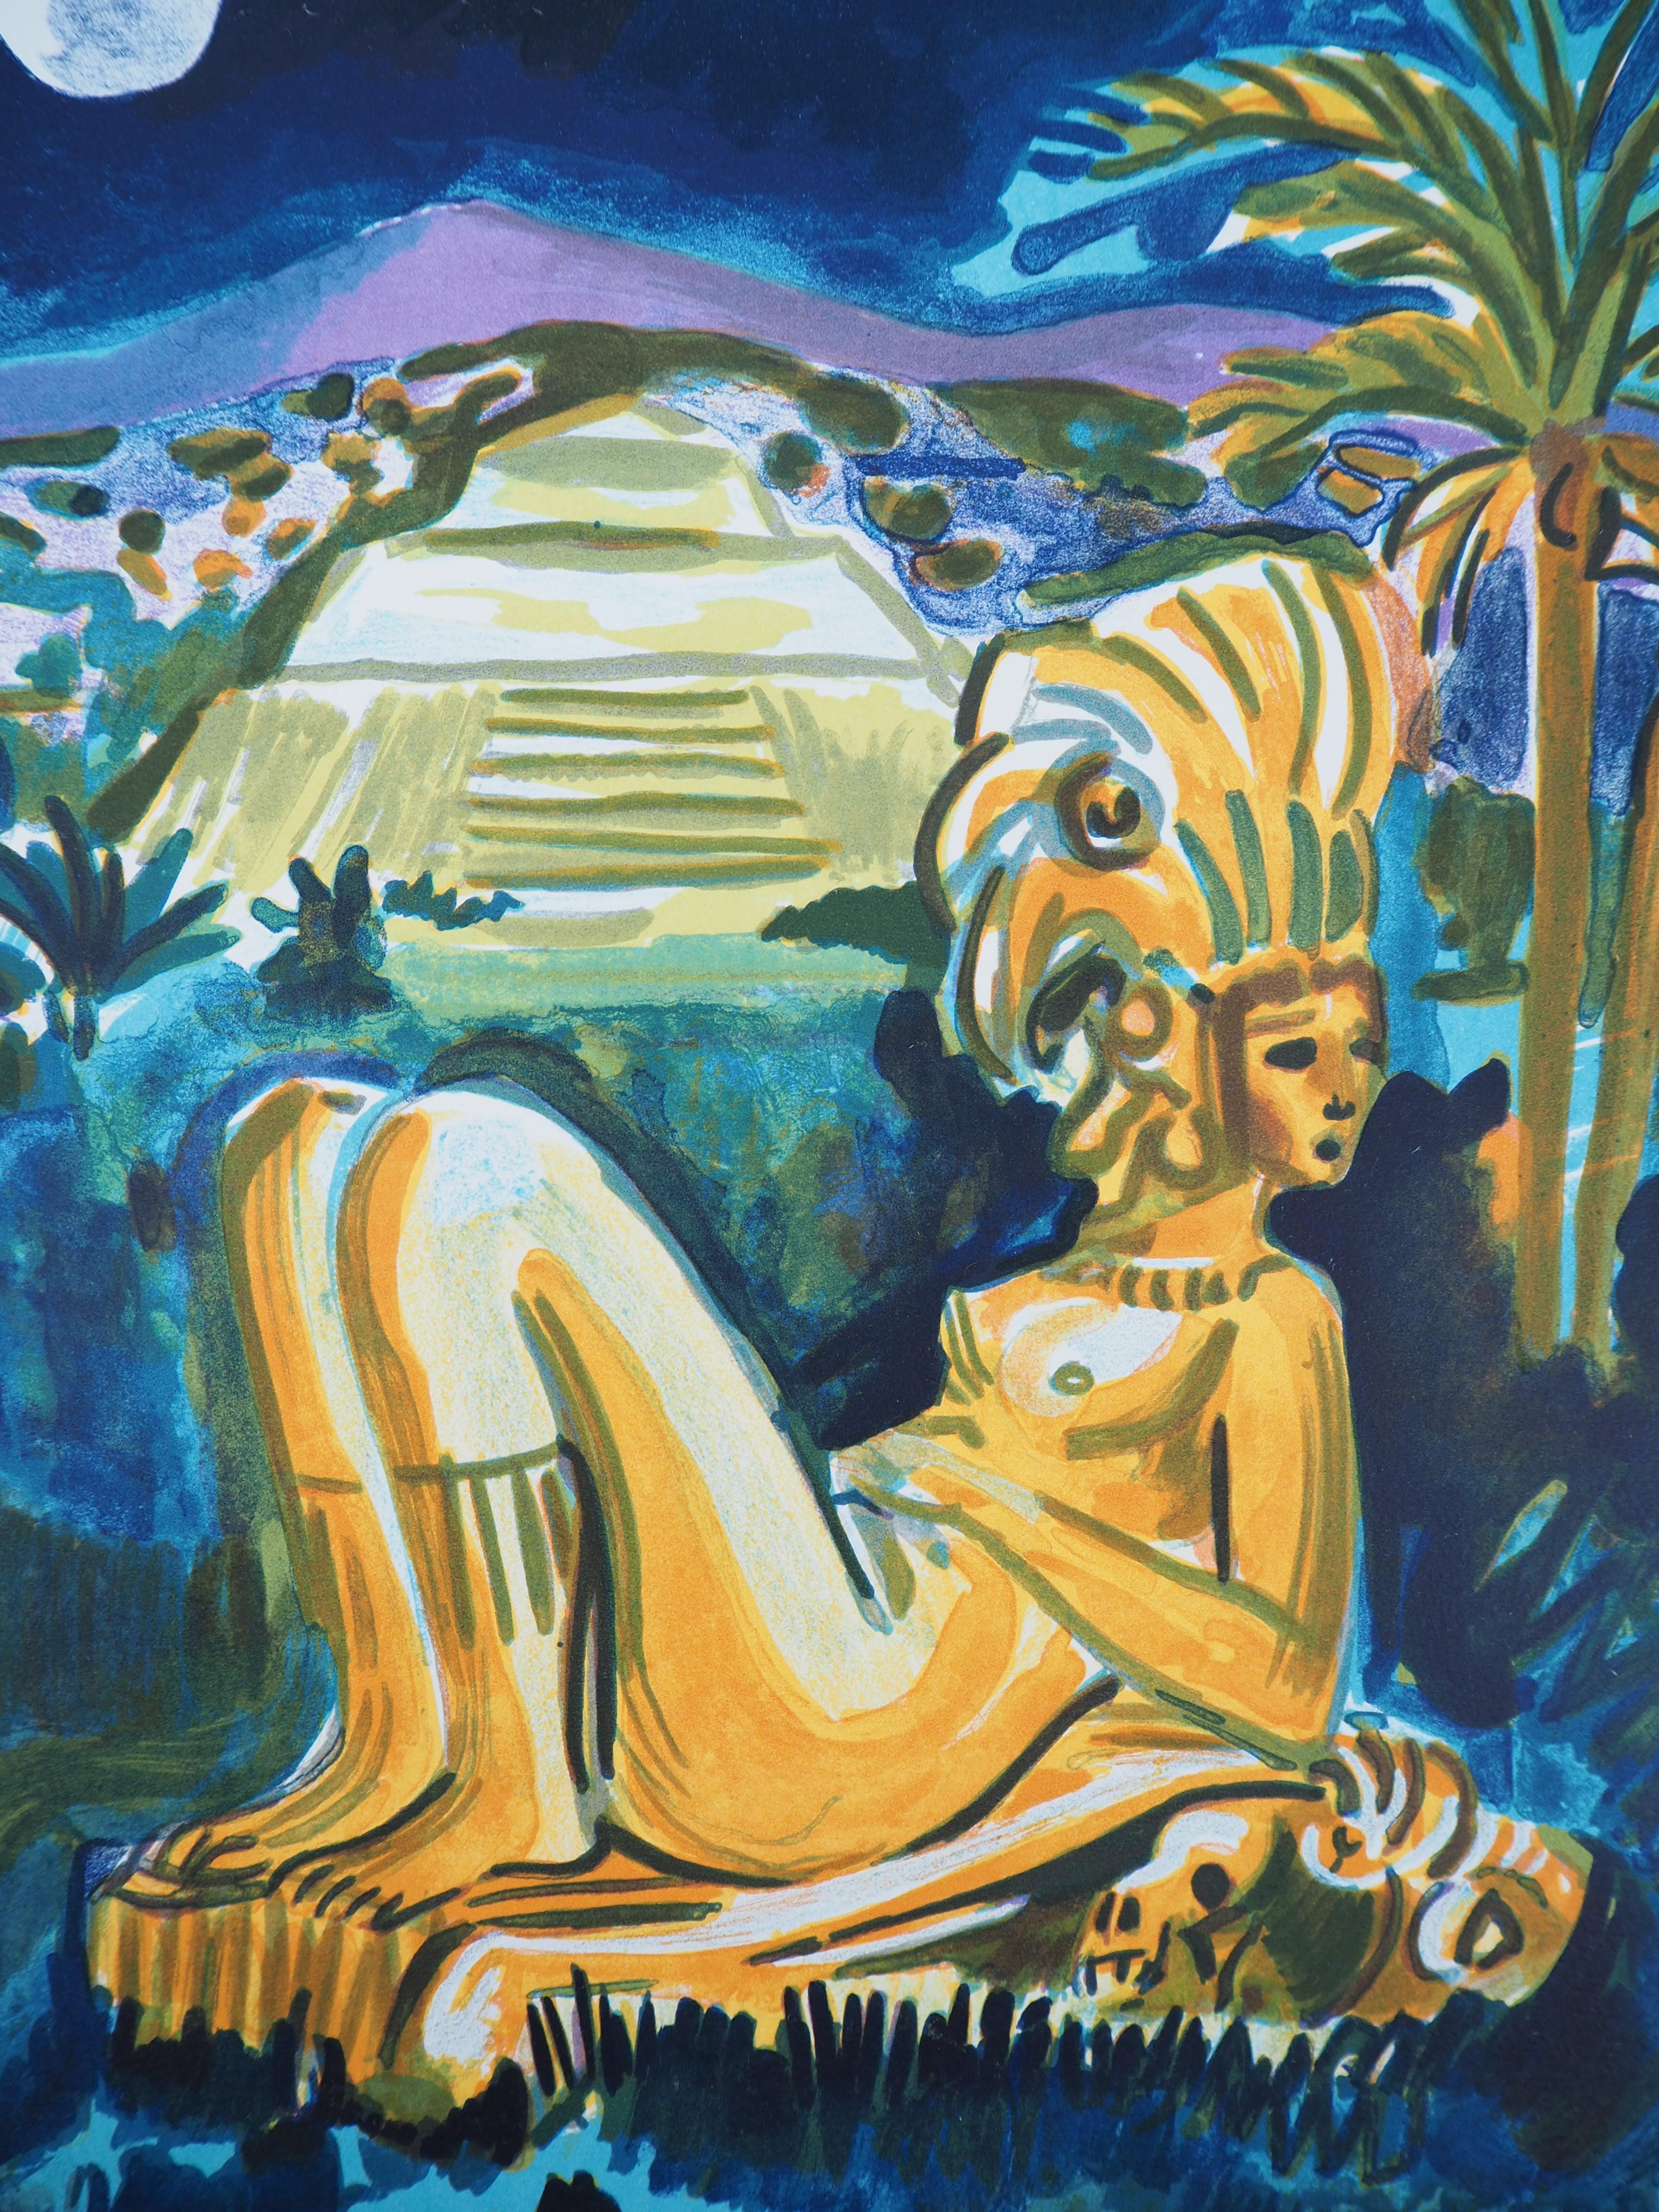 Mexico Mysteries (Pyramid) - Original handsigned lithograph - Gray Figurative Print by Yves Brayer